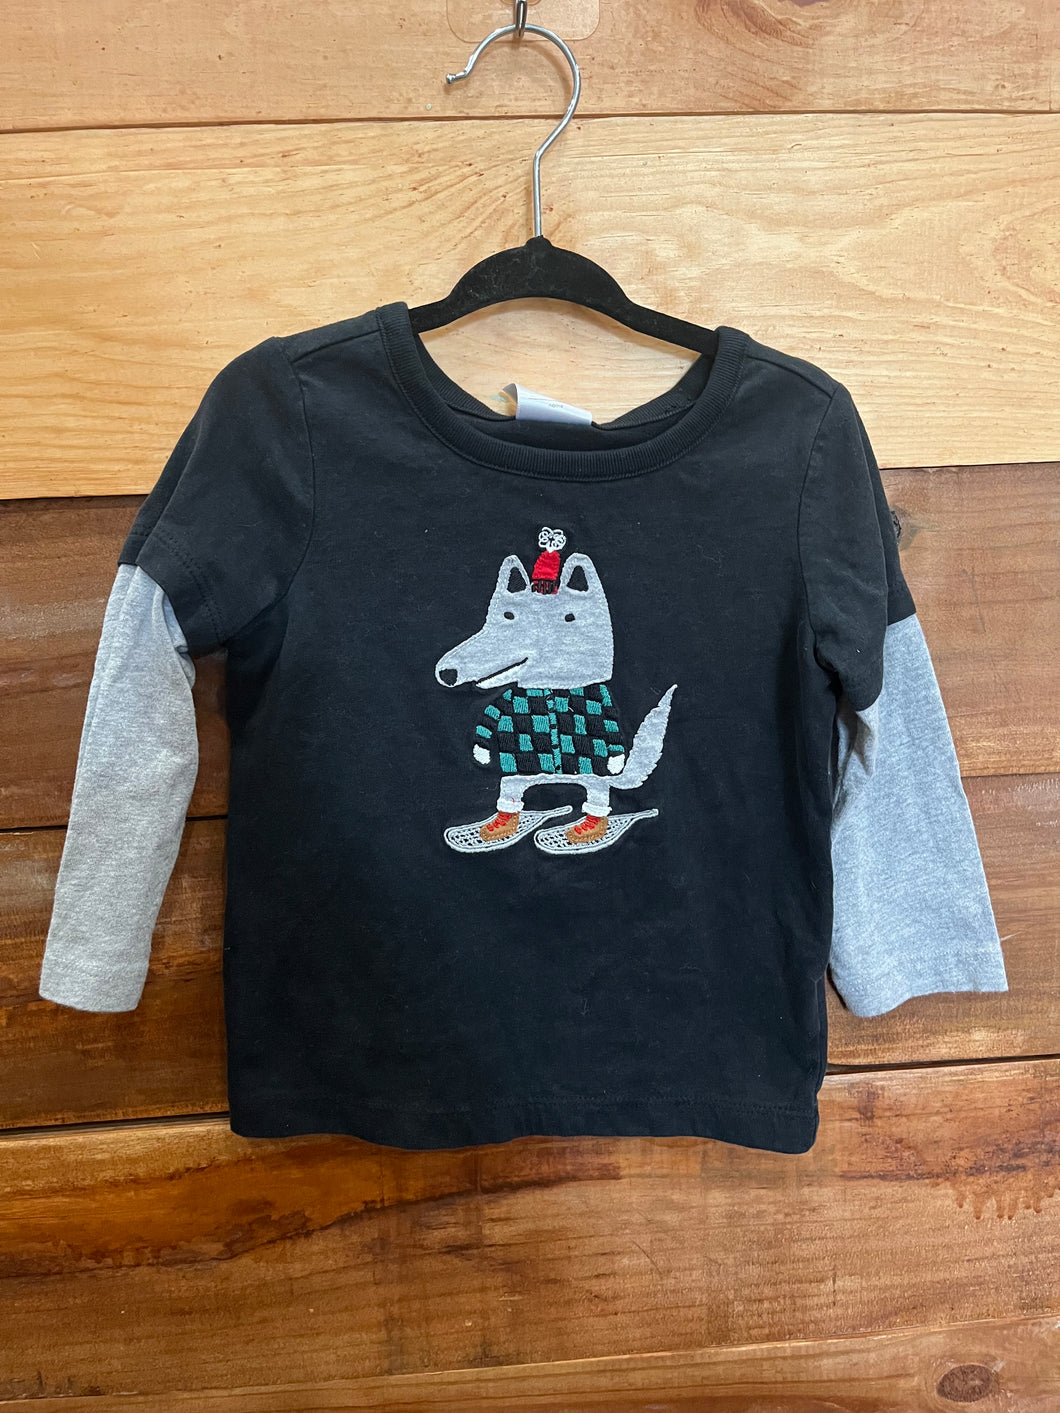 Hanna Andersson Wolf Shirt Size 2T